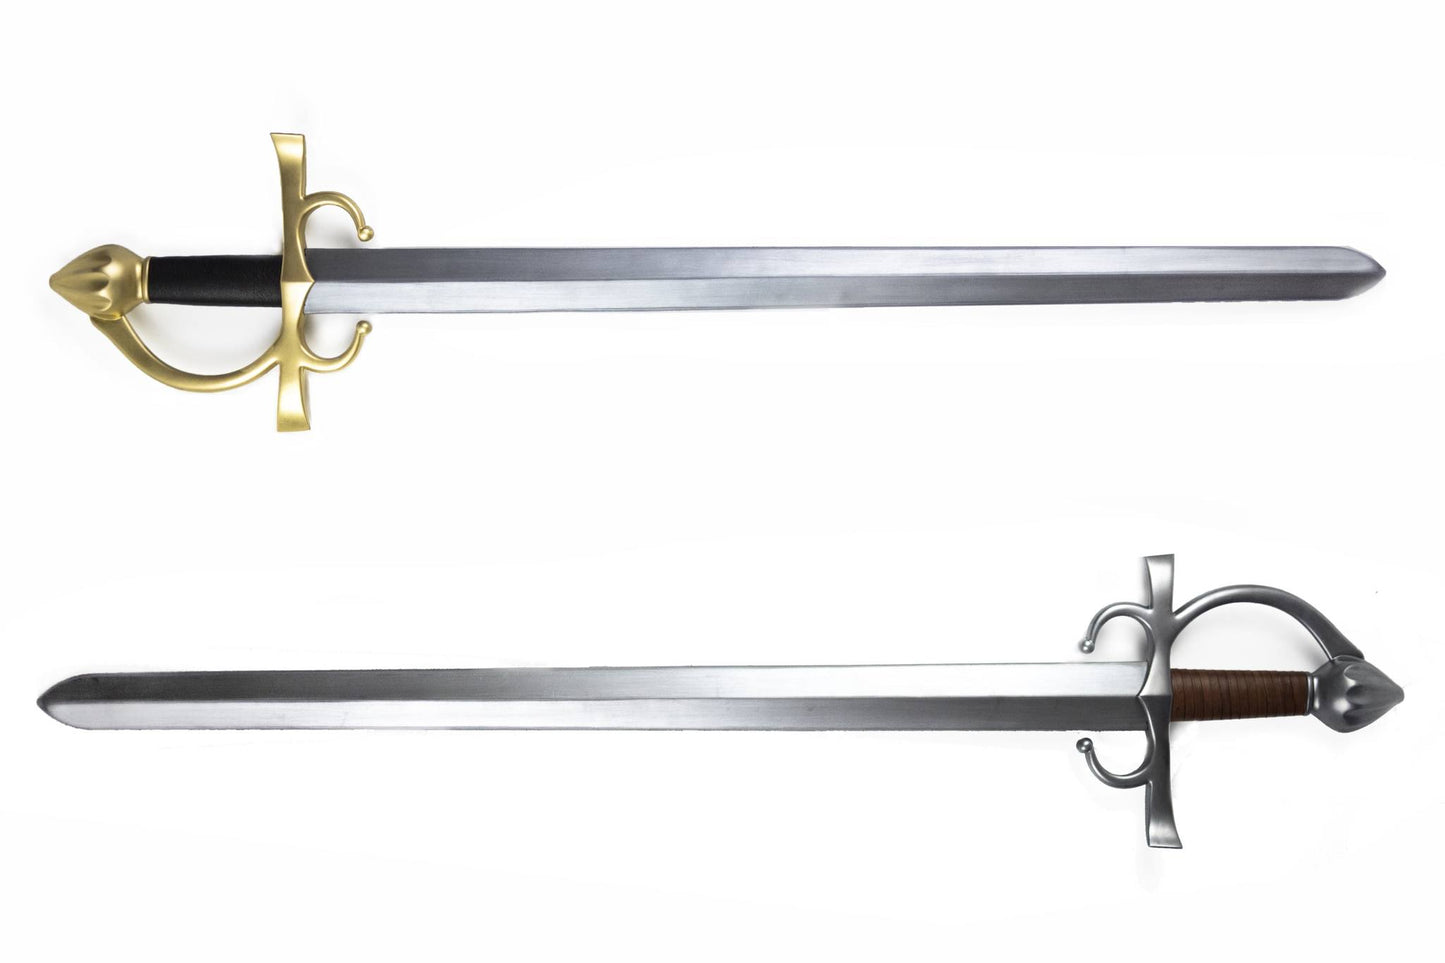 Sidesword - one-handed sword